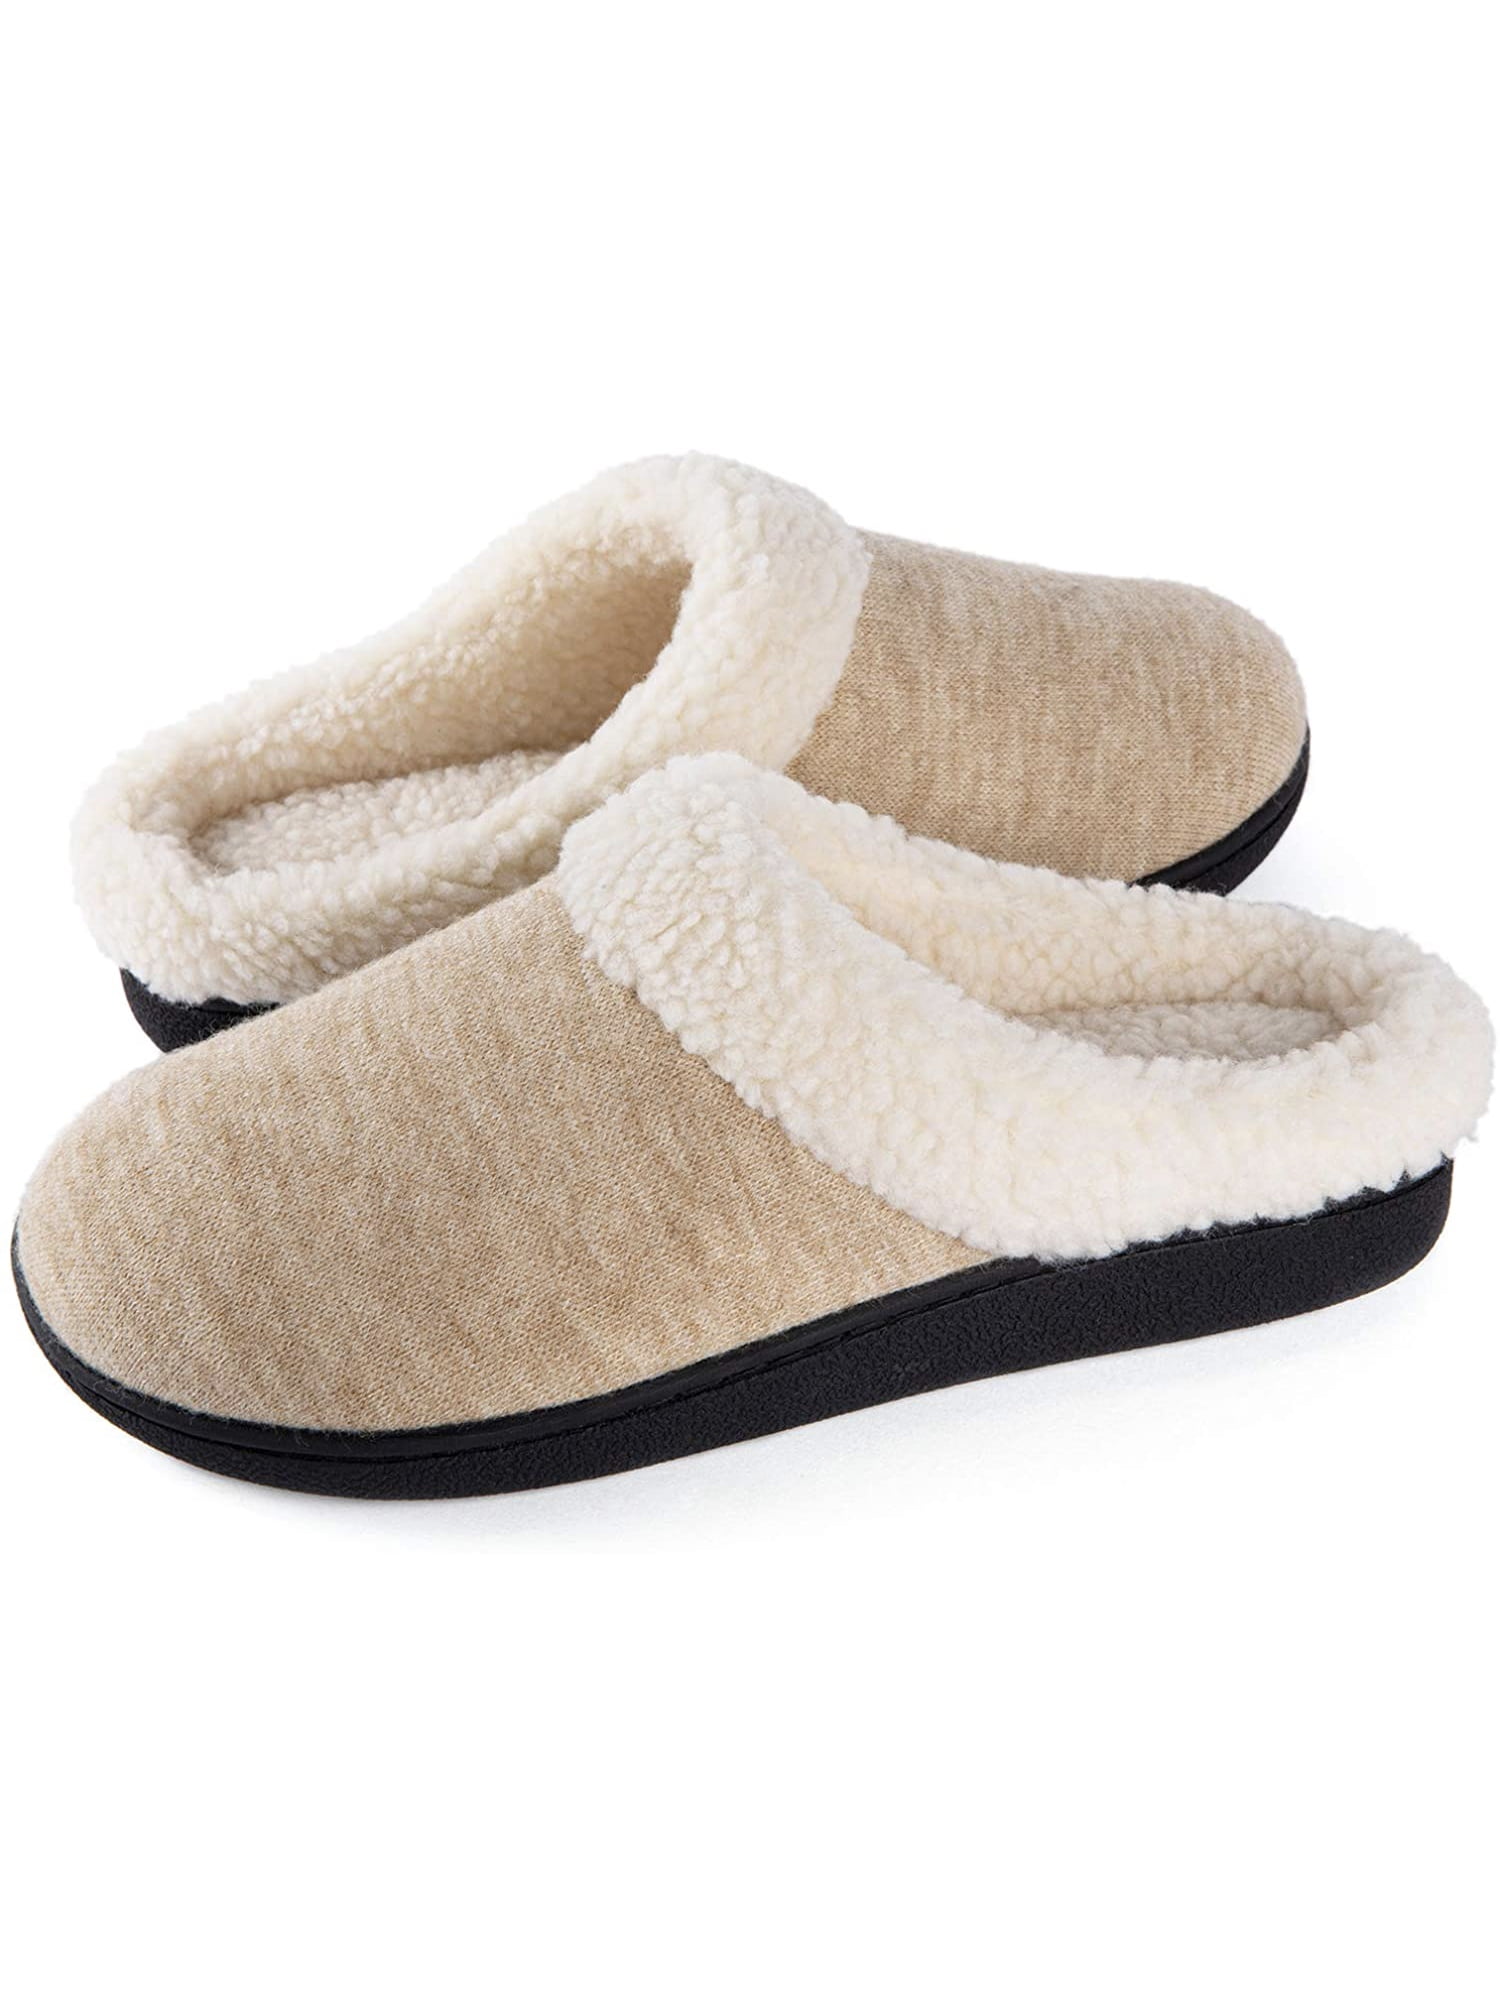 Womens Memory Foam Slippers Indoor/Outdoor Cozy House Shoes Flats Non-Slip Sole 